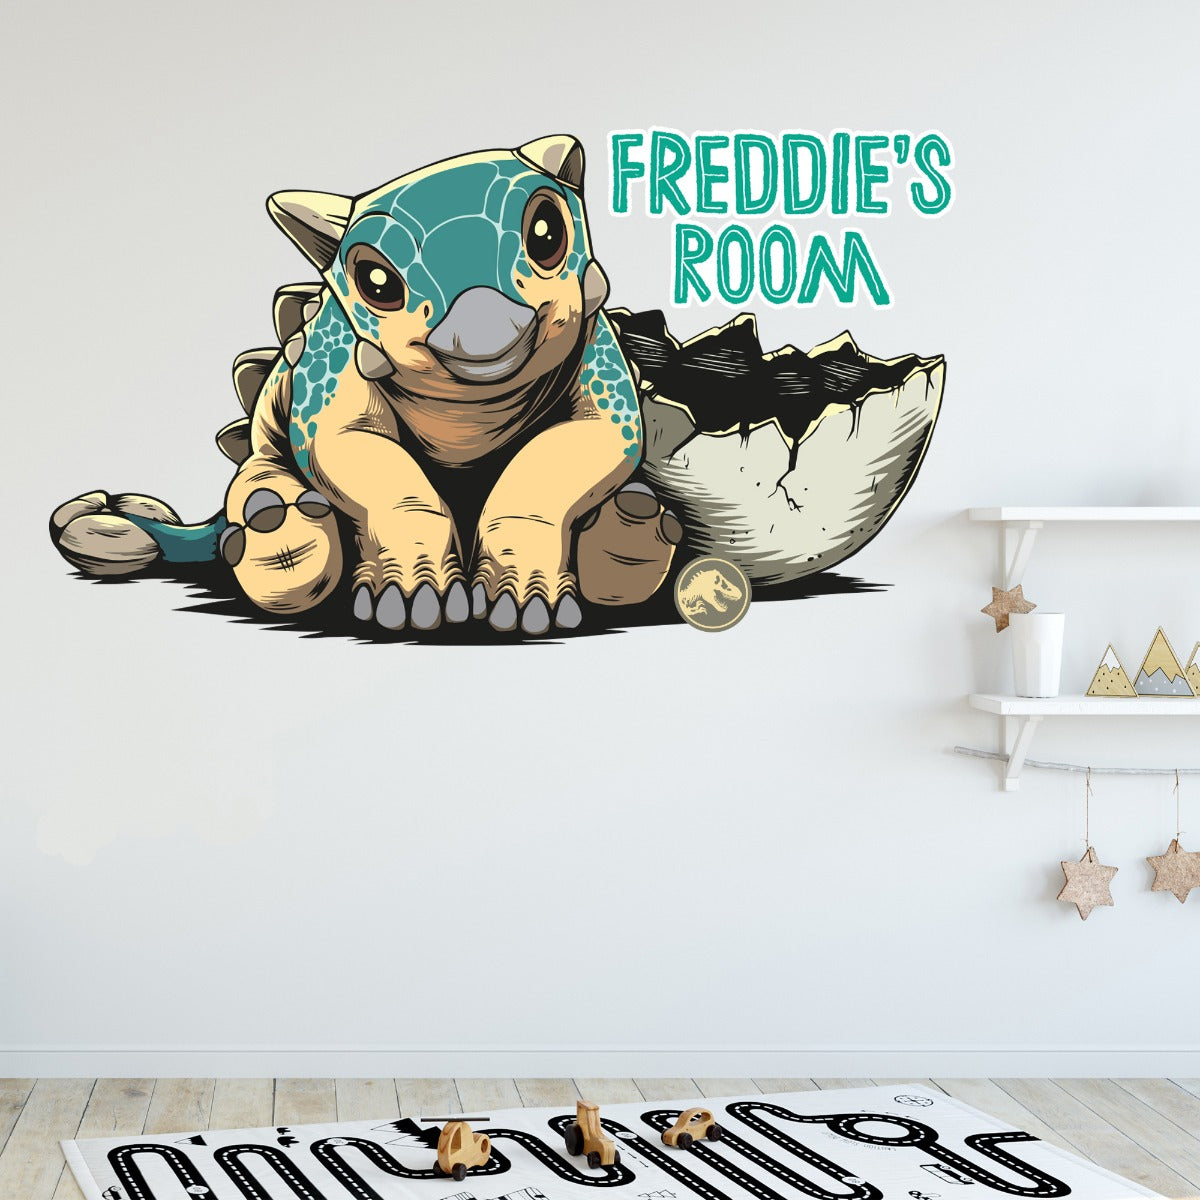 Jurassic World Camp Cretaceous Wall Sticker - Bumpy Personalised Name